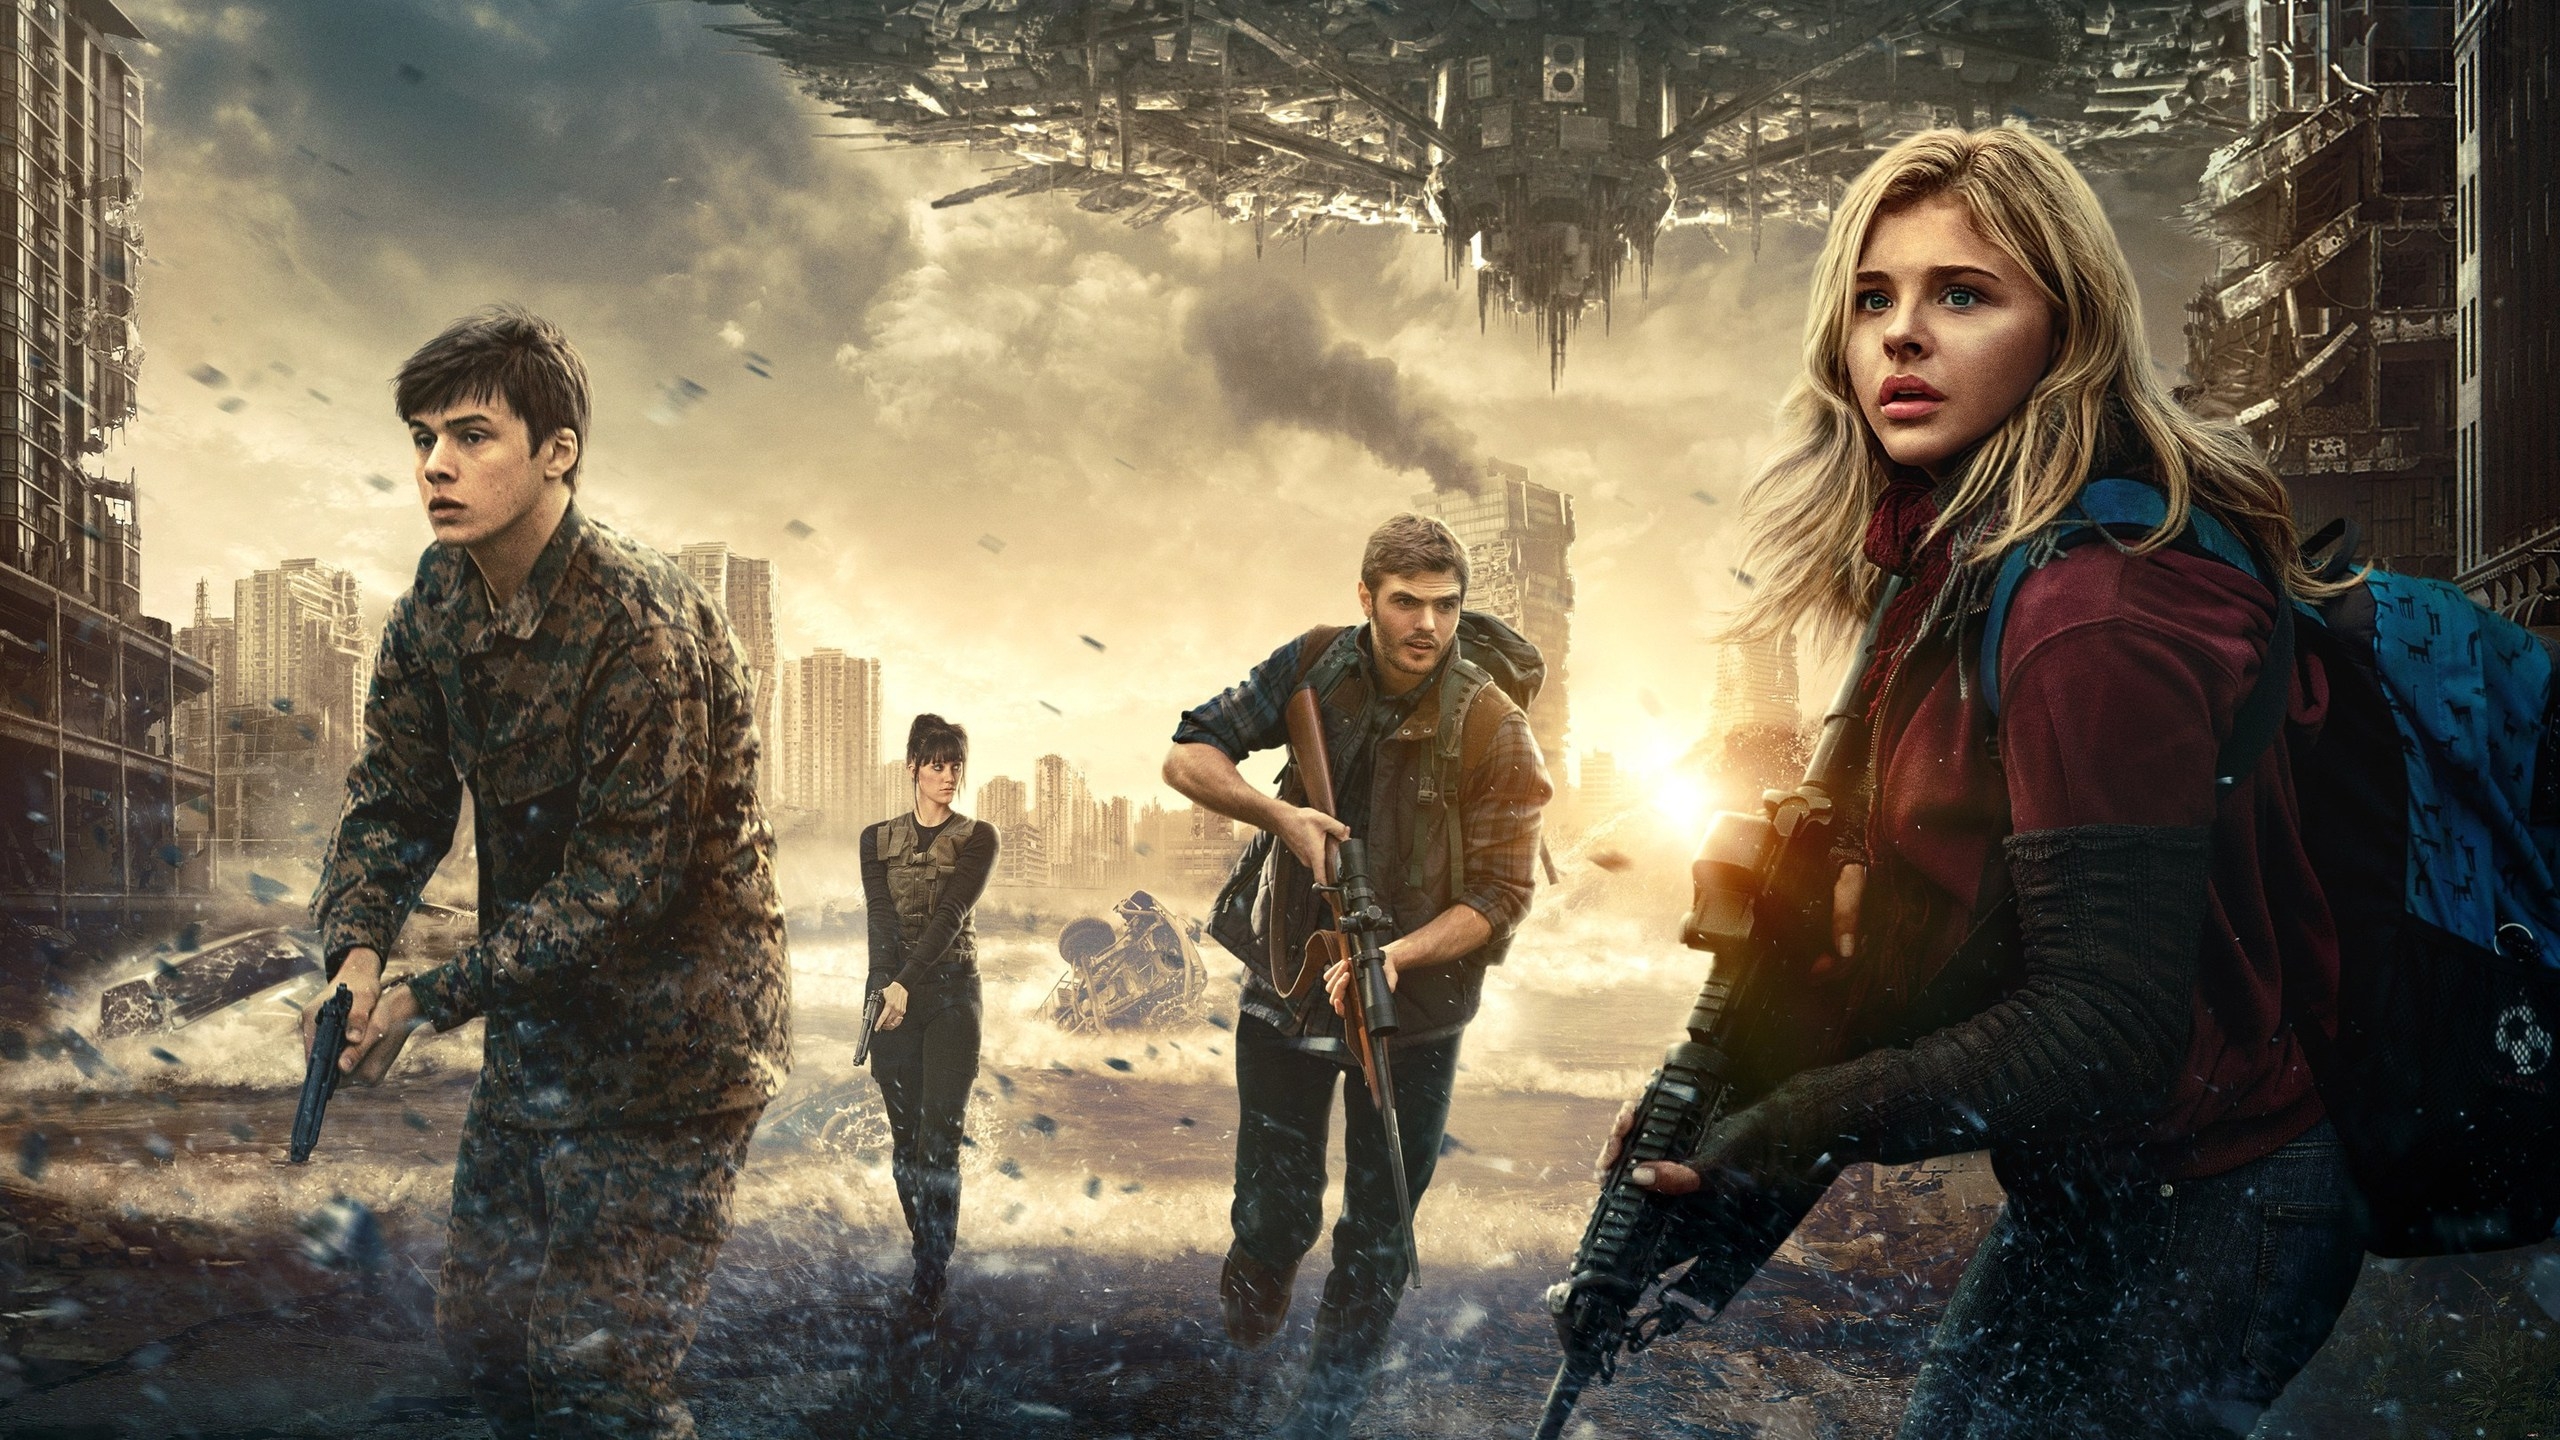 The 5th Wave Film 2016 for 2560x1440 HDTV resolution